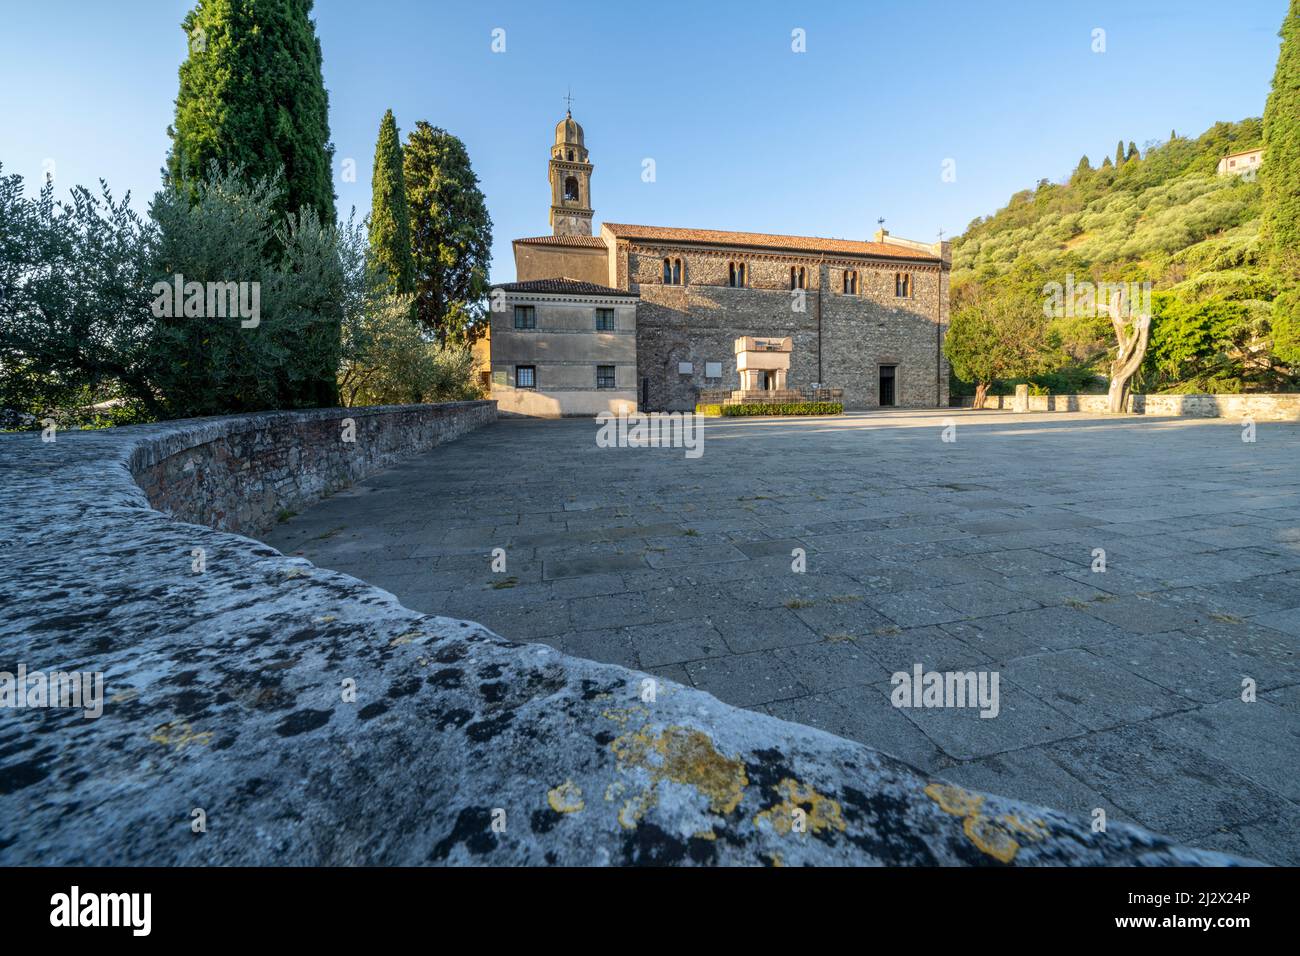 Exterior views of Arqua Pertrarca, one of the most beautiful villages in Italy, Veneto, Italy Stock Photo